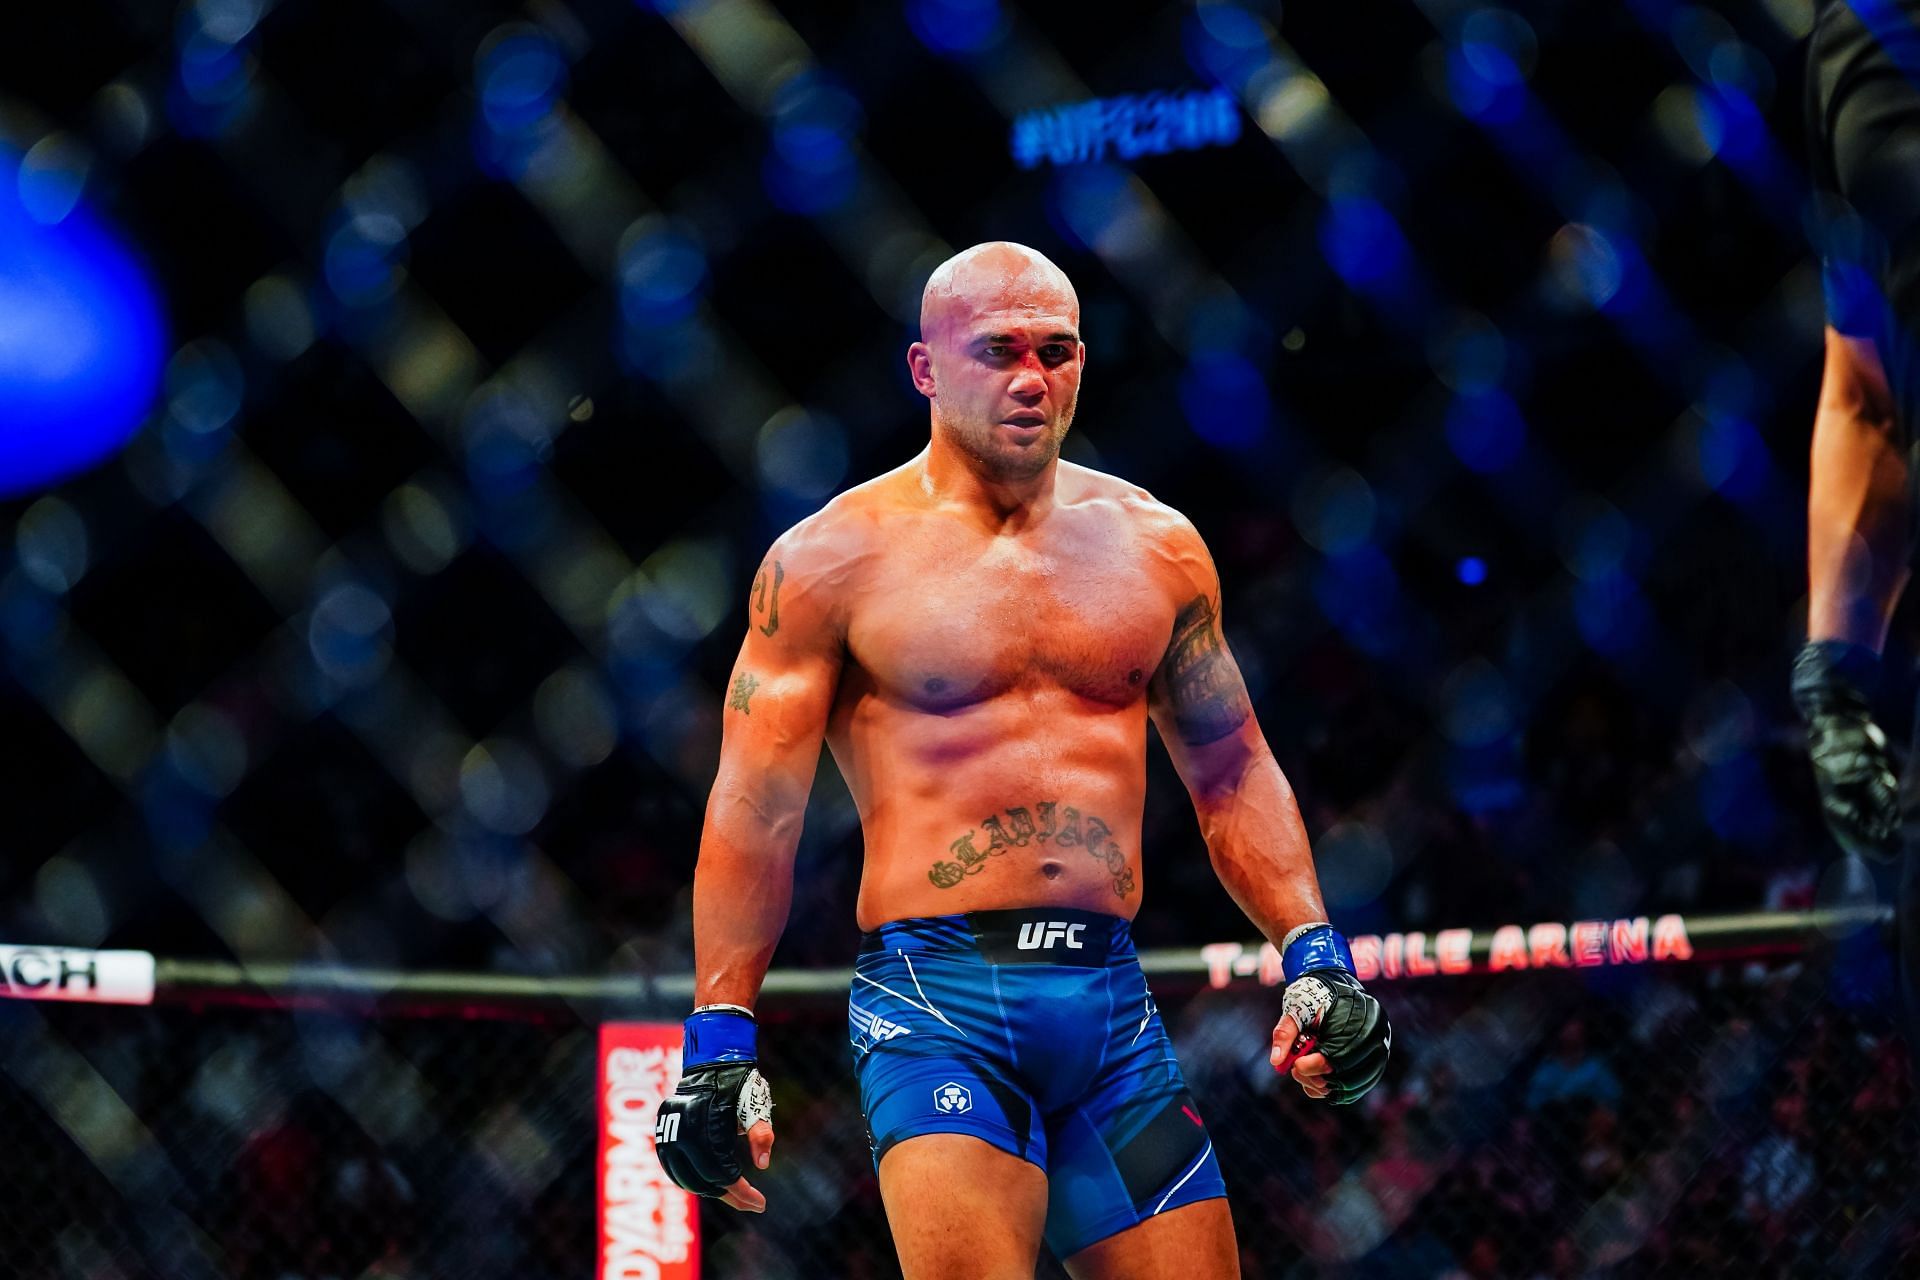 Robbie Lawler has realistically been past his best for some time now